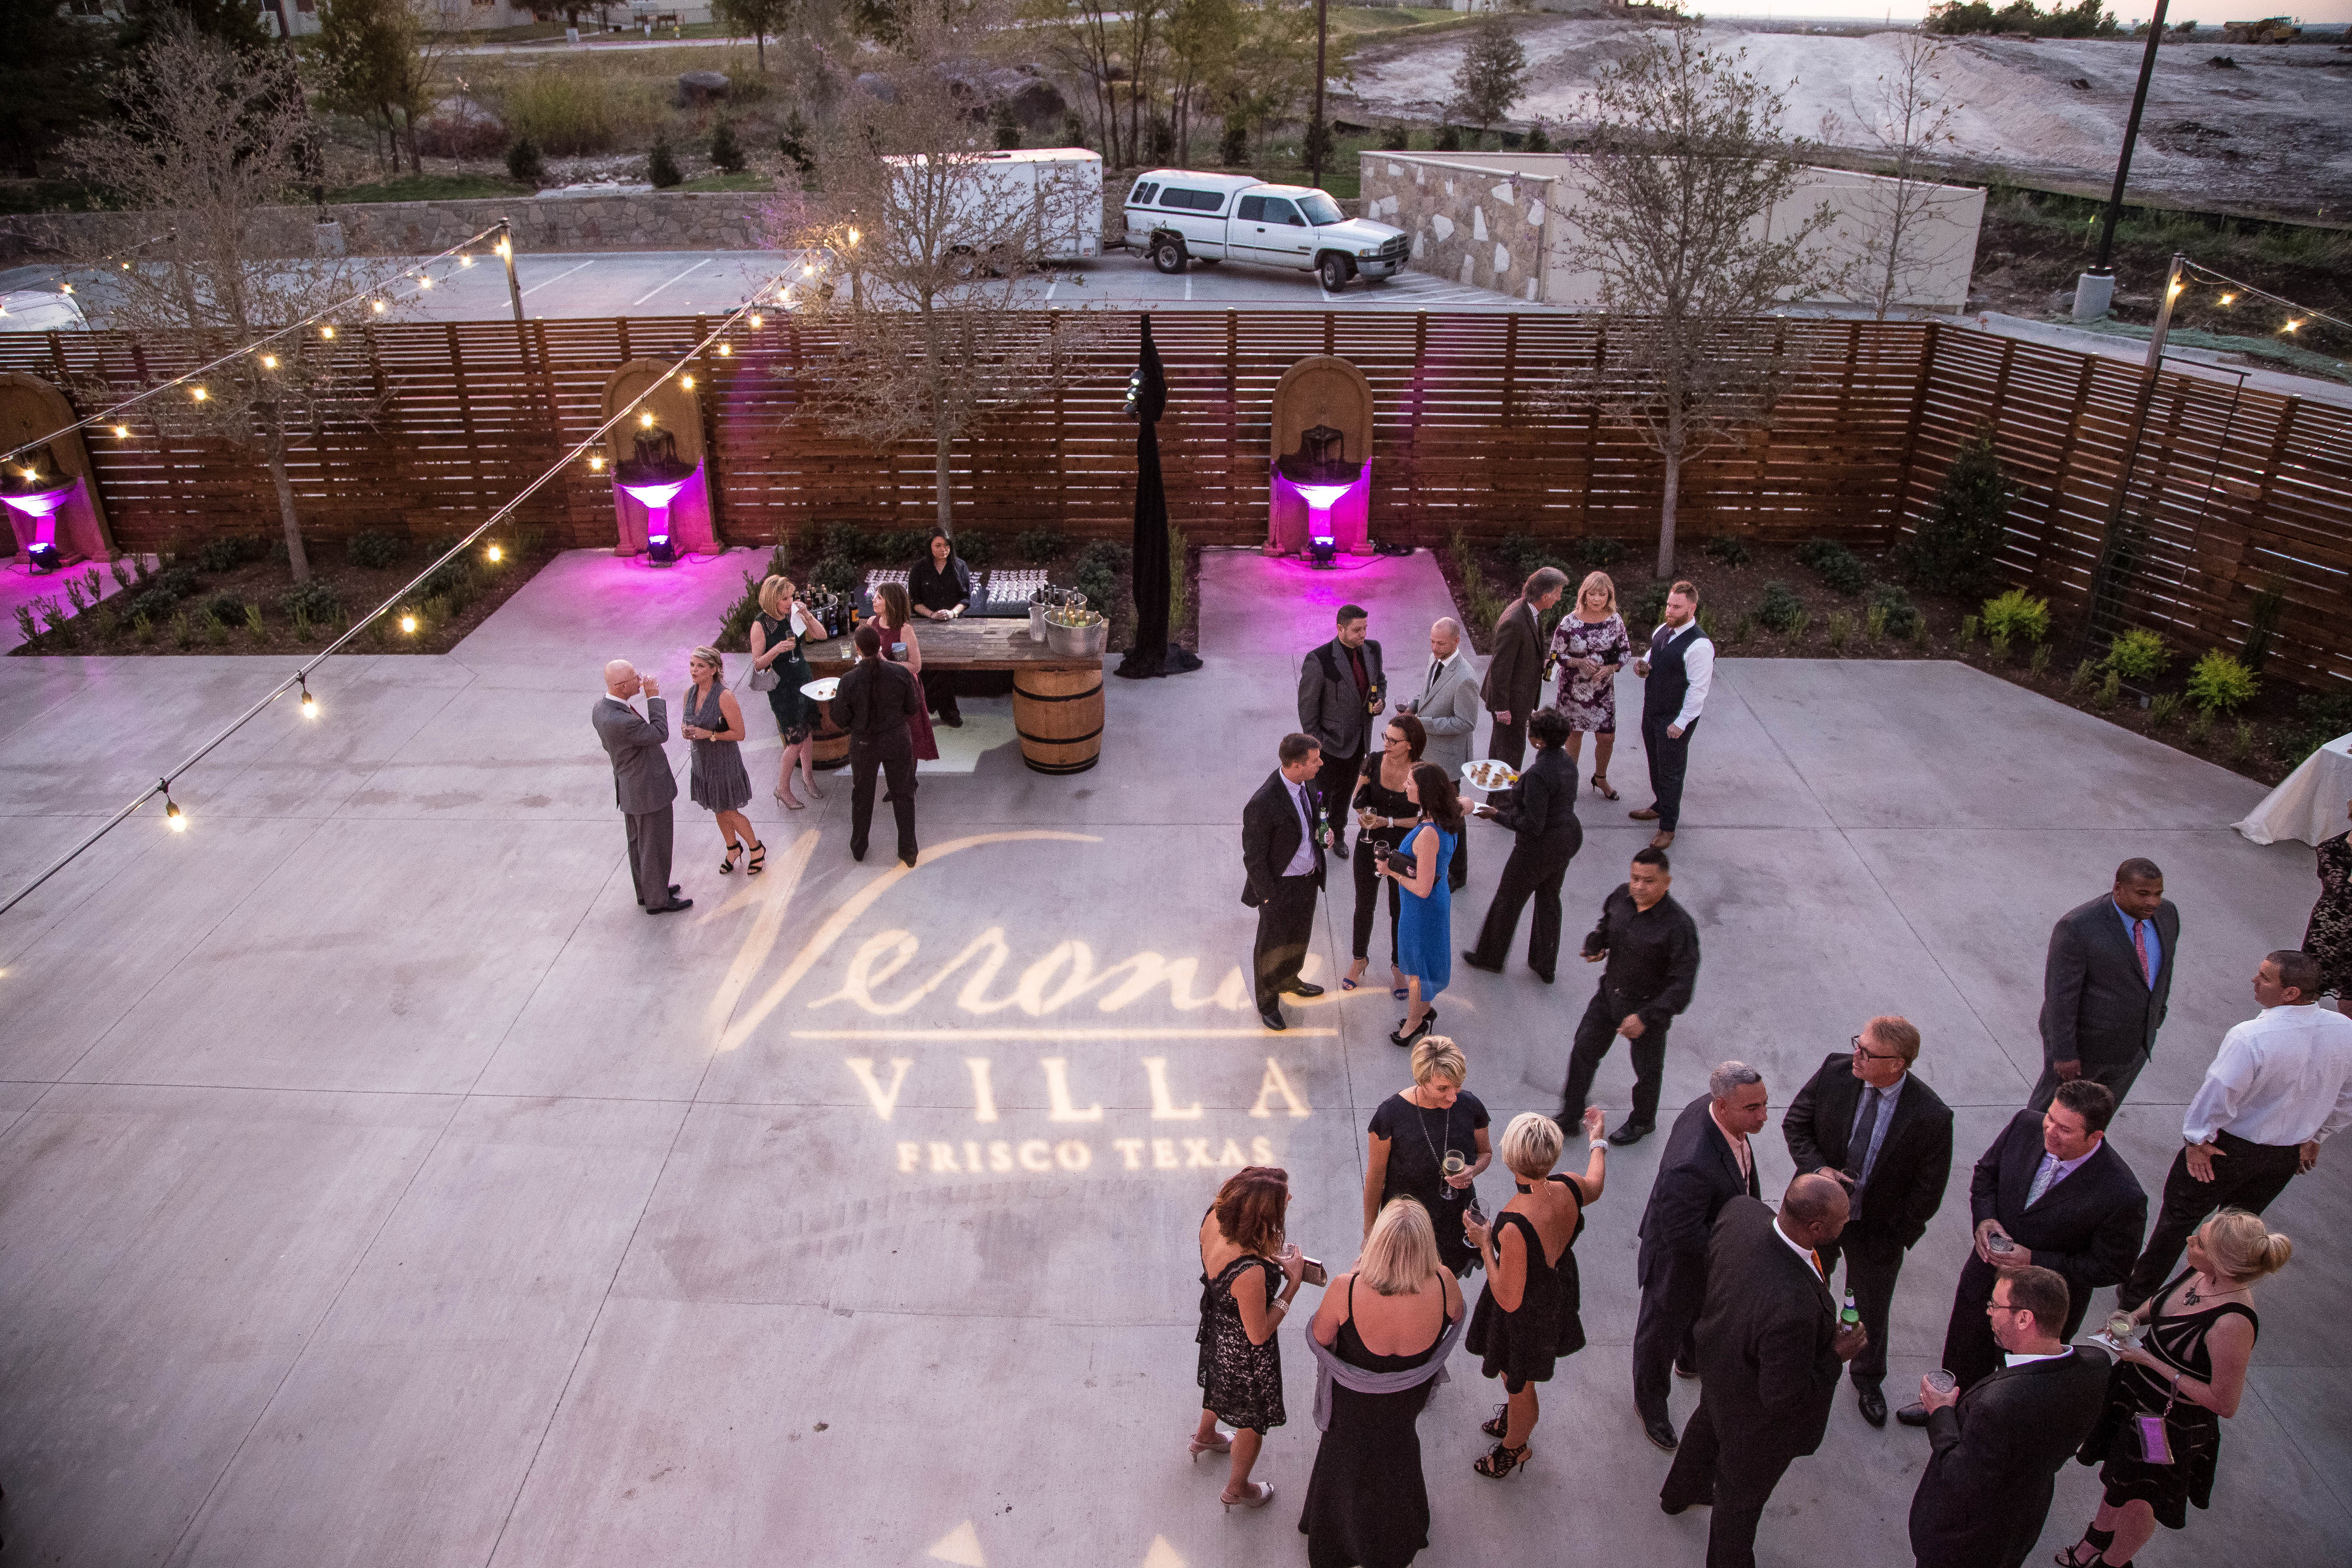 Overhead shot of people gathered on the patio of Verona Villa, an event venue in Frisco.